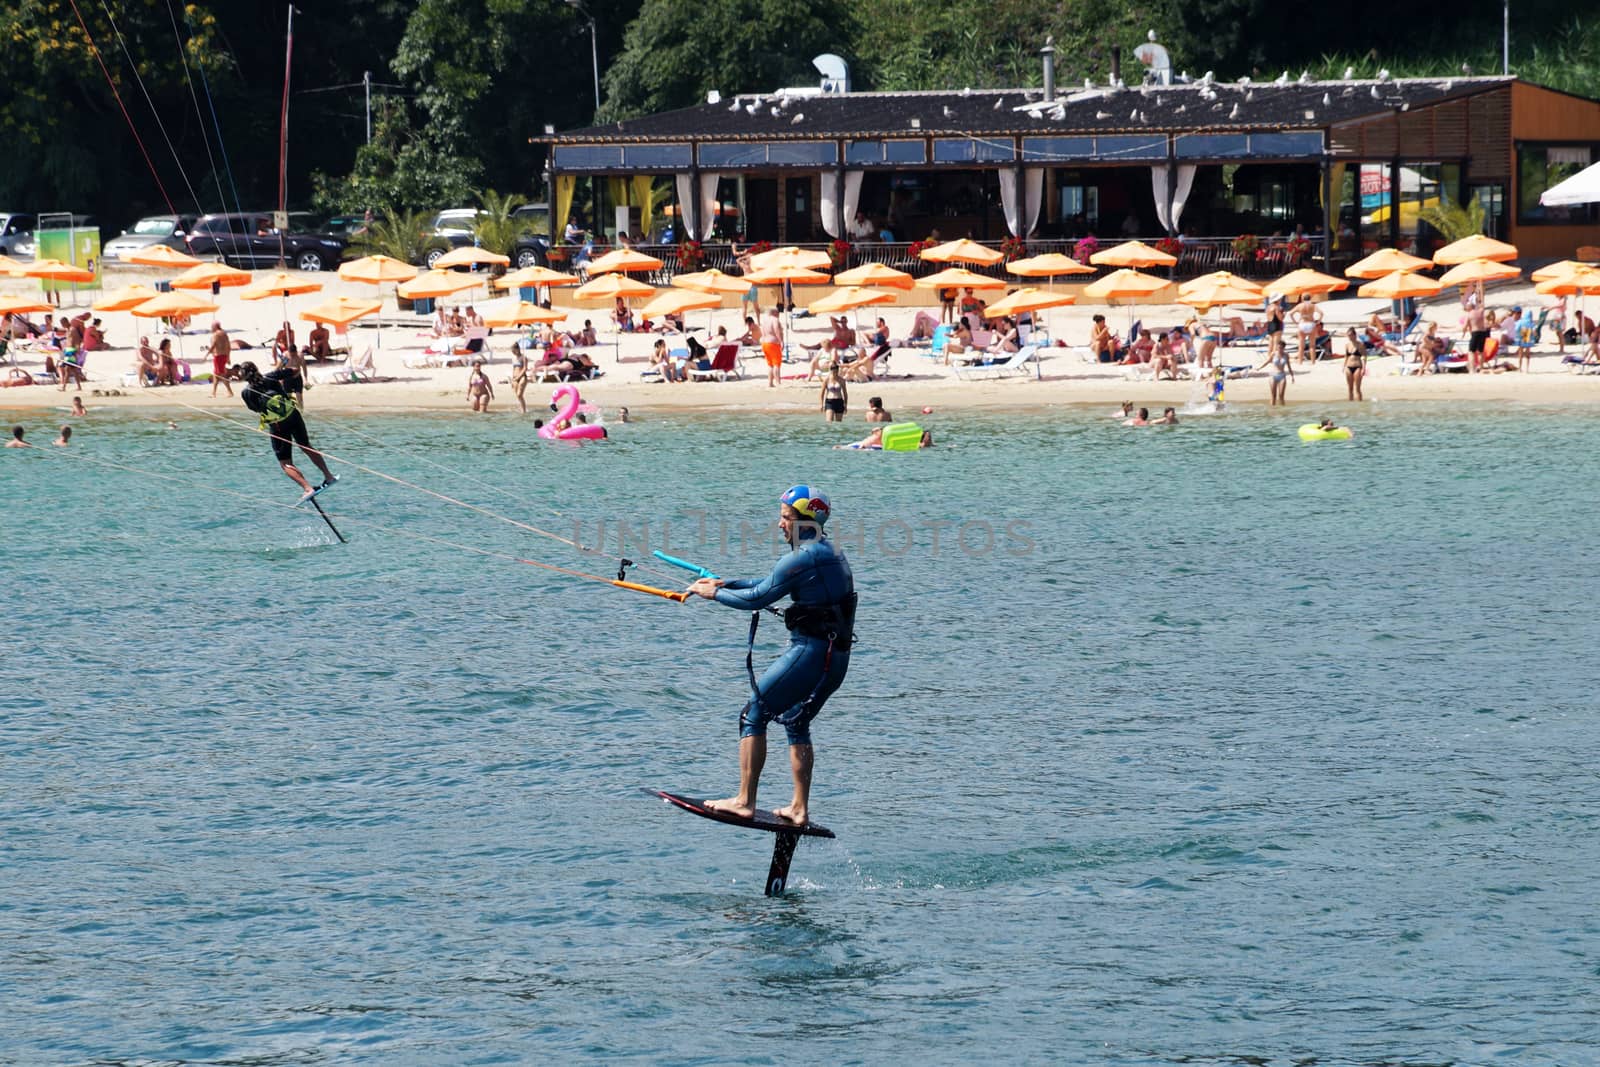 Varna, Bulgaria - July, 19, 2020: a man is kiting the sea against the background of the beachVarna